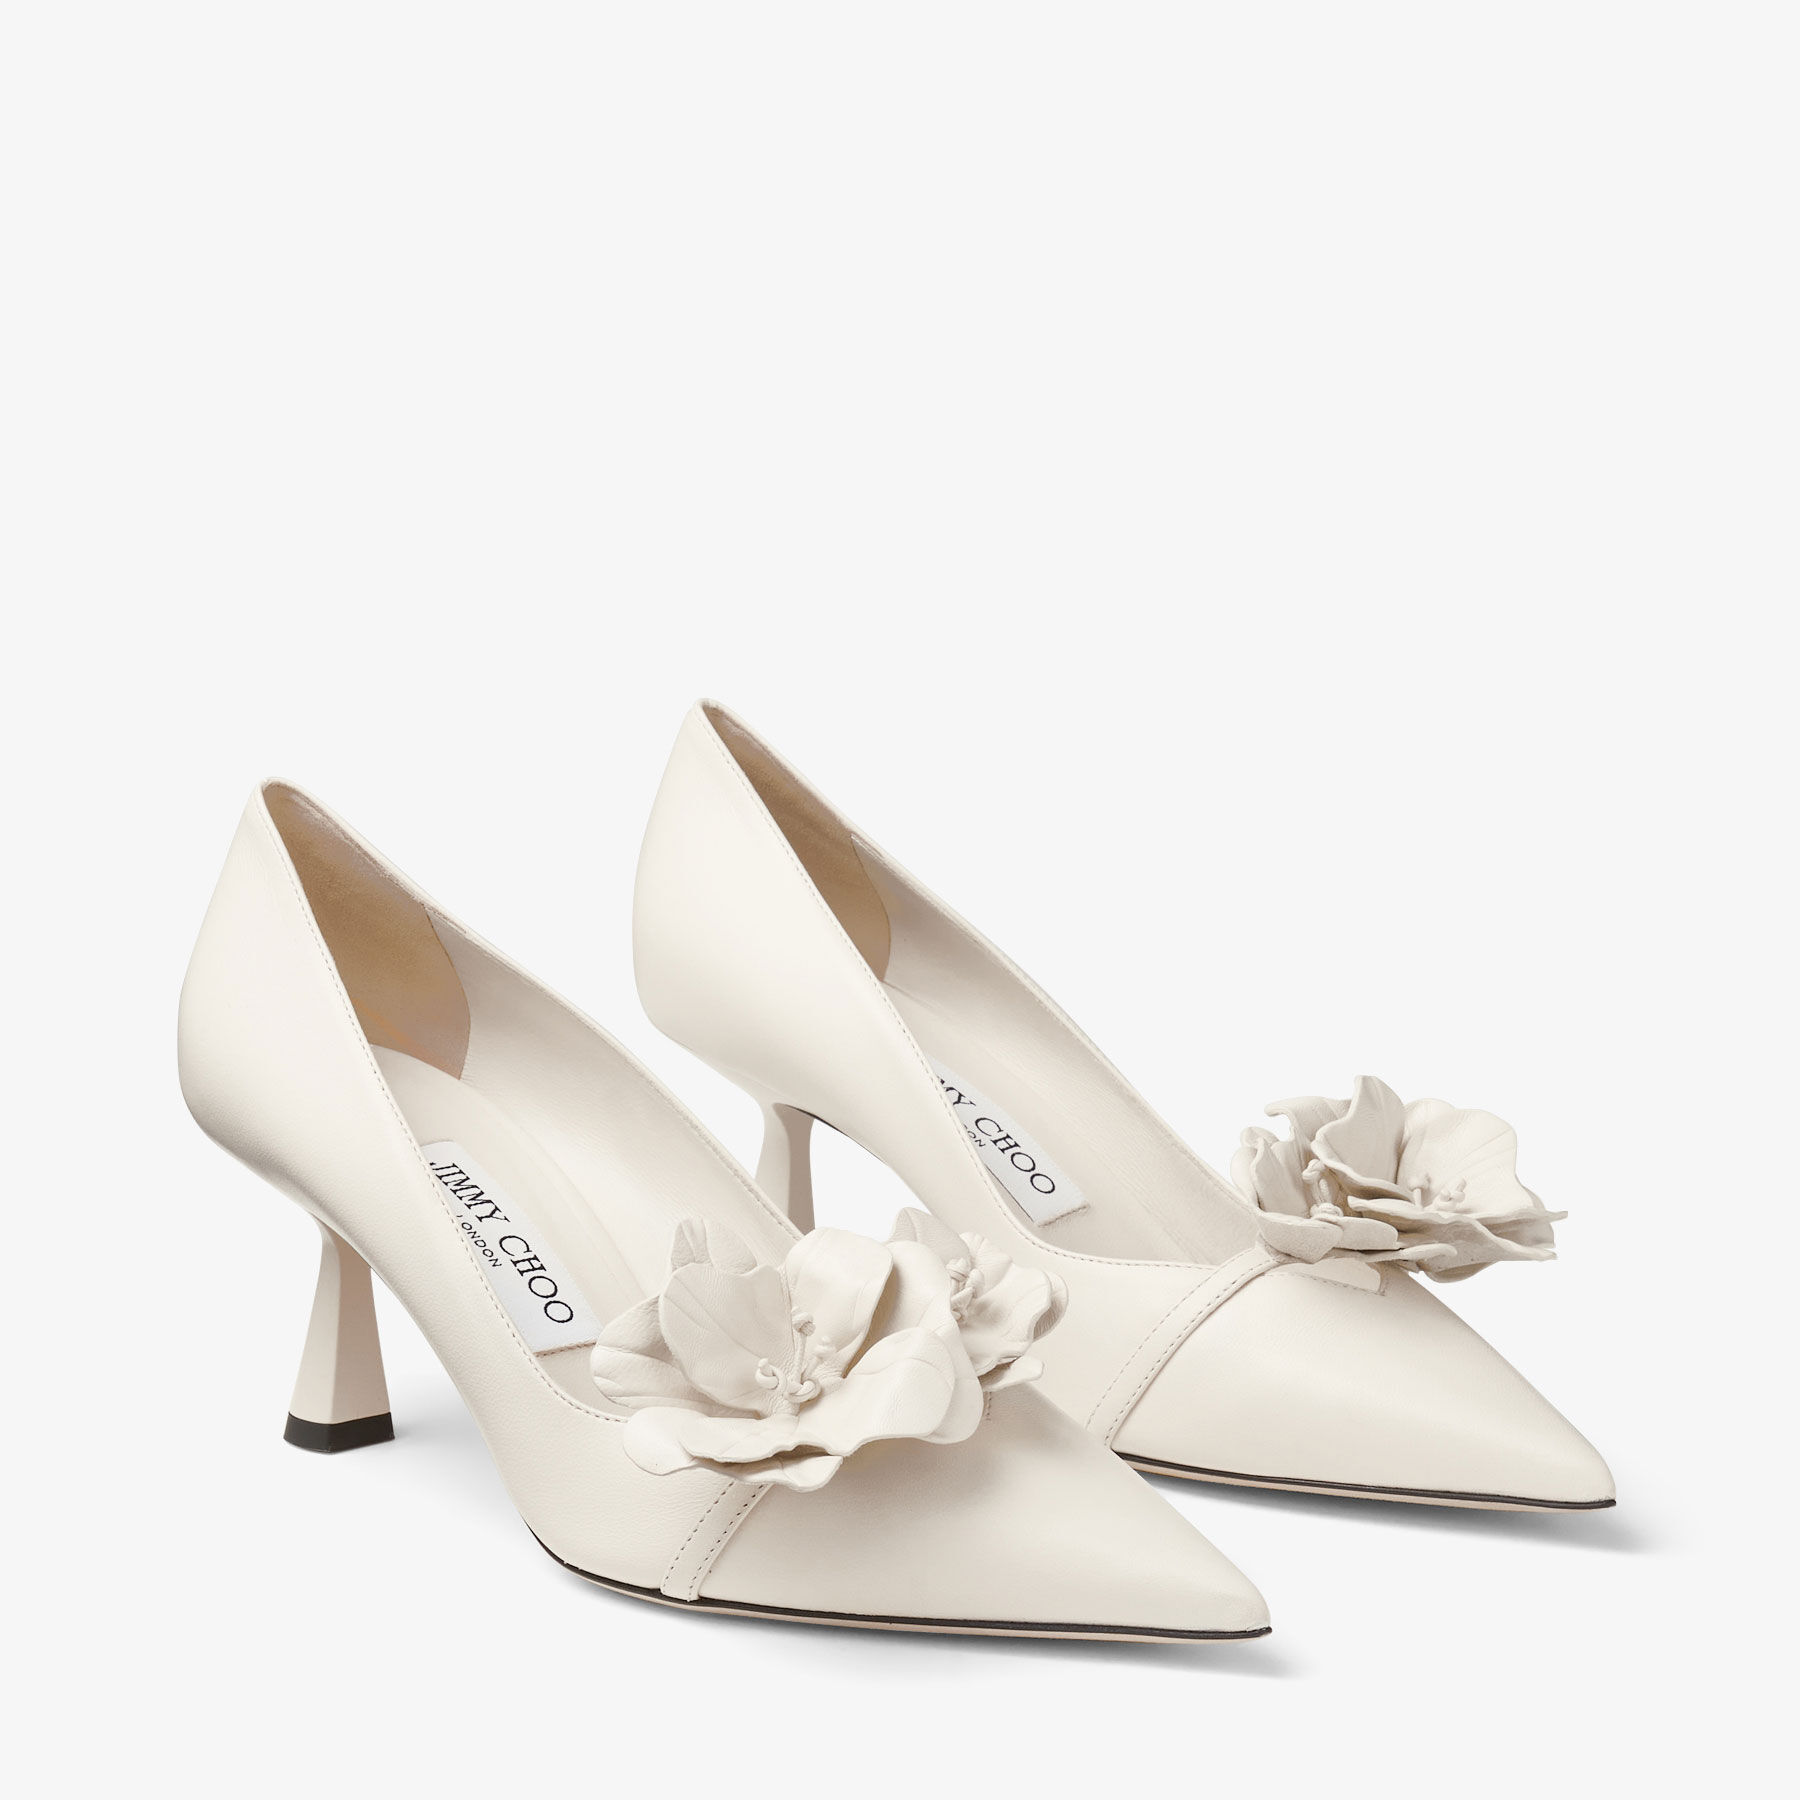 ROSALIA/FLOWERS 65 | Latte Nappa Leather Pumps with Flowers | New 